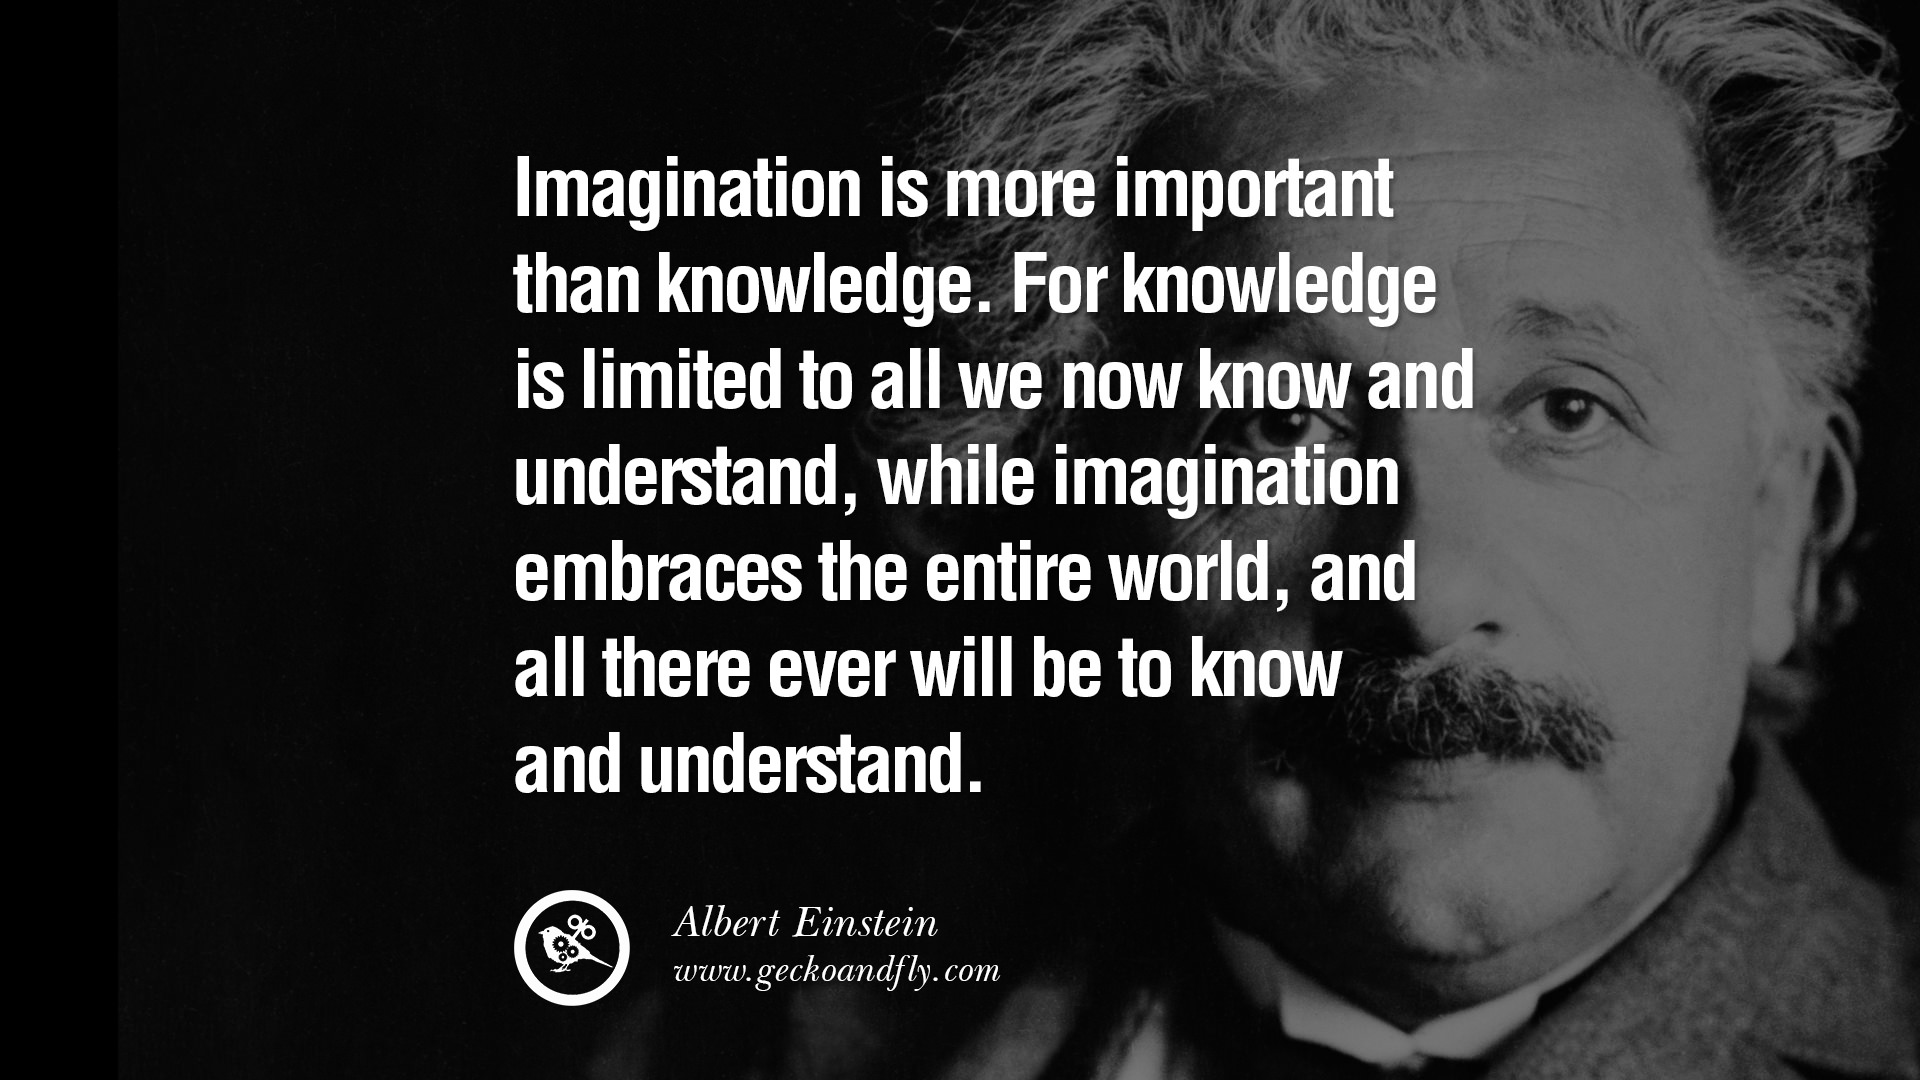 Imagination most. Imagination is more important than knowledge. Quotes about creativity. For knowledge. Albert Einstein Pop Art imagination is more important than knowledge.